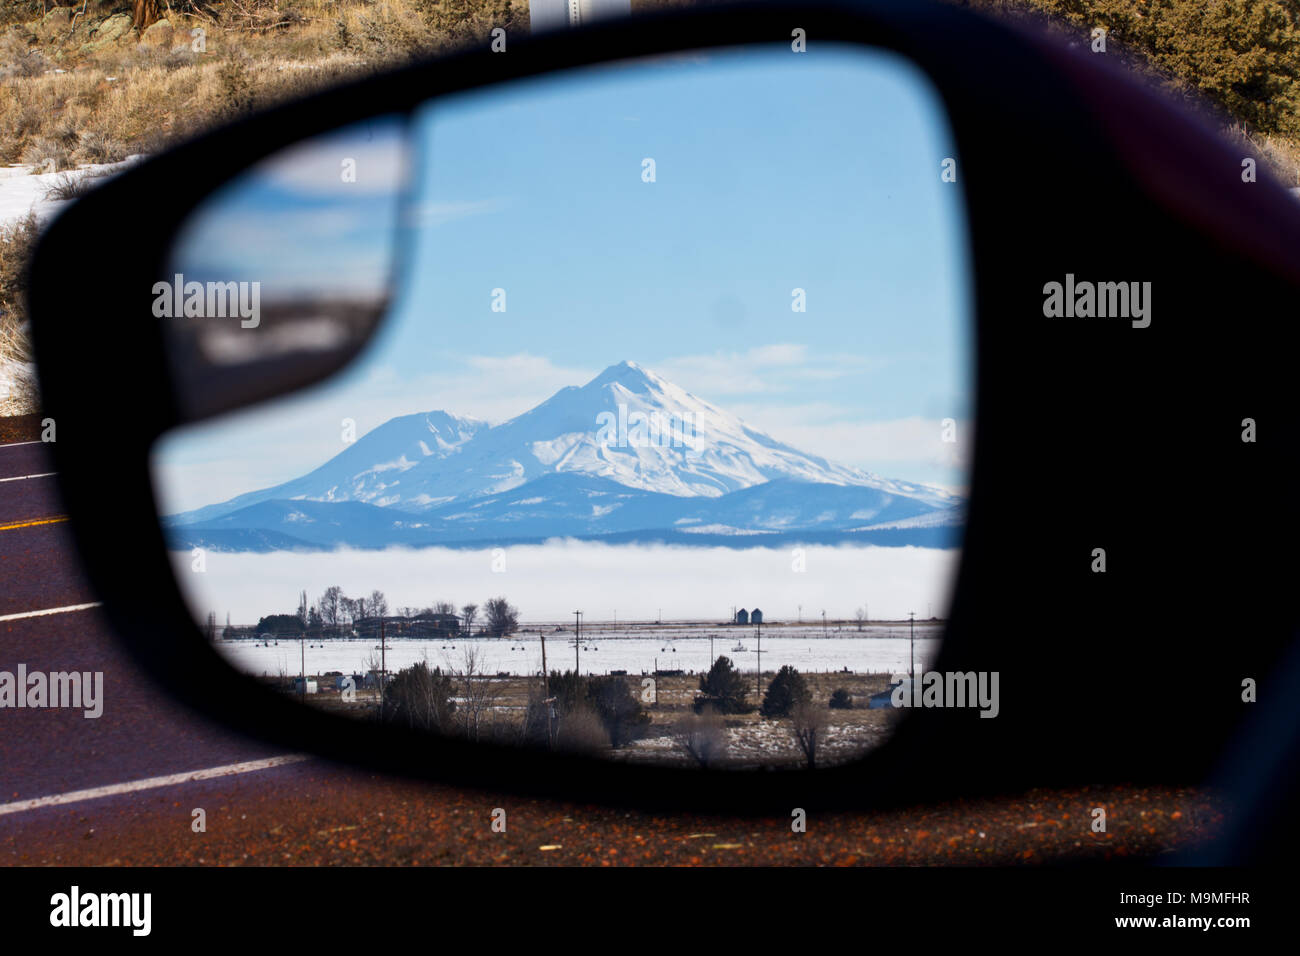 The snowy summit of Mount Shasta stands tall in a car door sideview mirror in Northern California in Winter Stock Photo